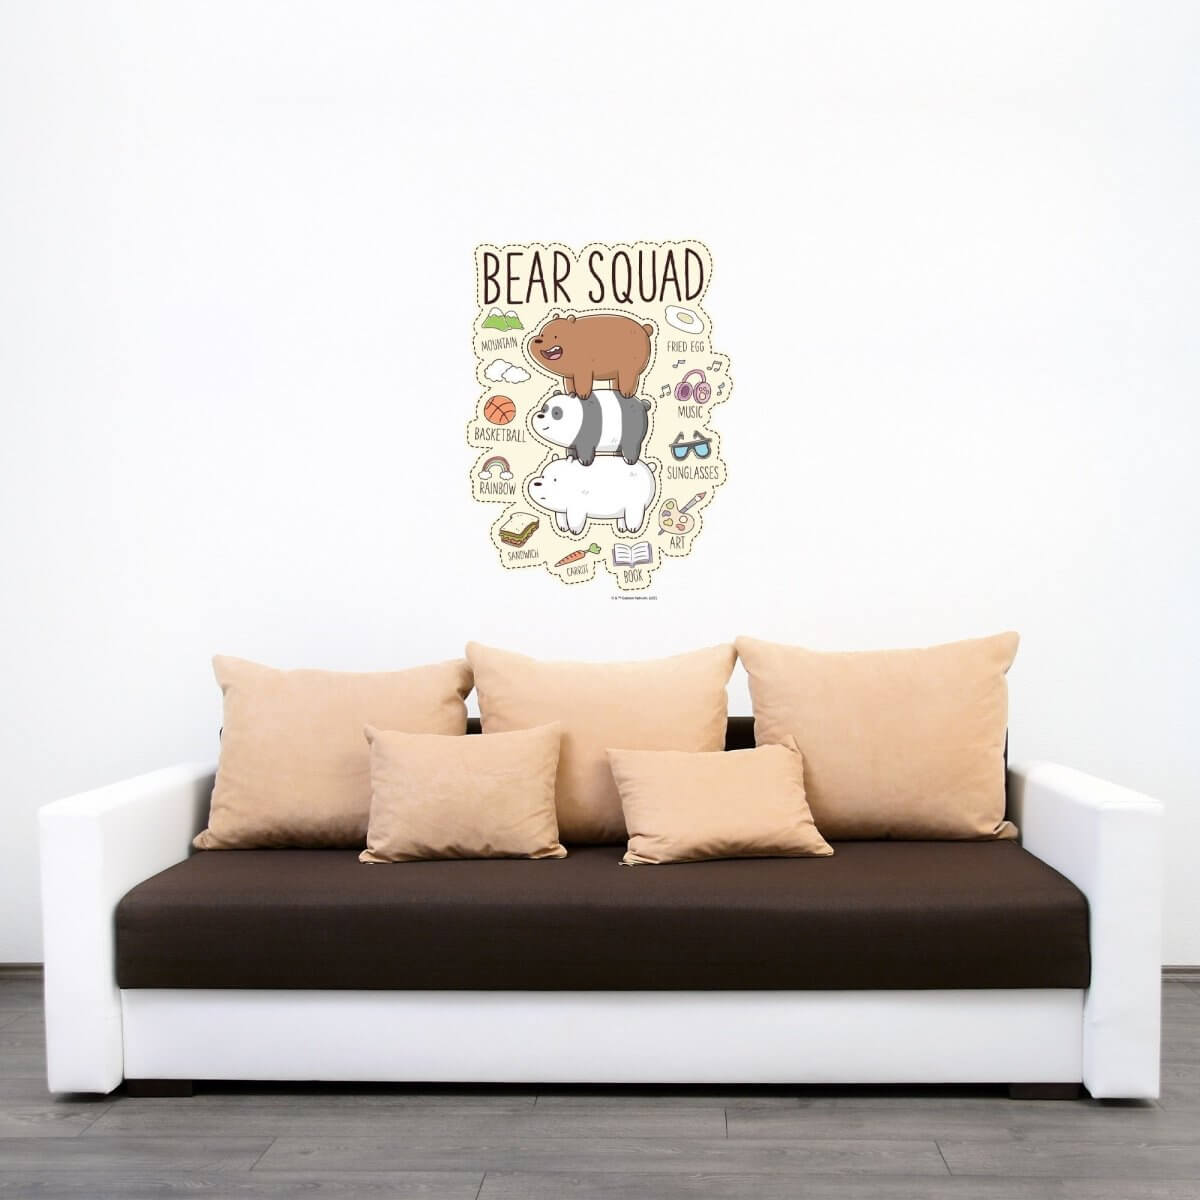 Kismet Decals Home & Room Decor We Bare Bears Squad Hobbies Wall decal sticker - officially licensed - latex printed with no solvent odor - Kismet Decals